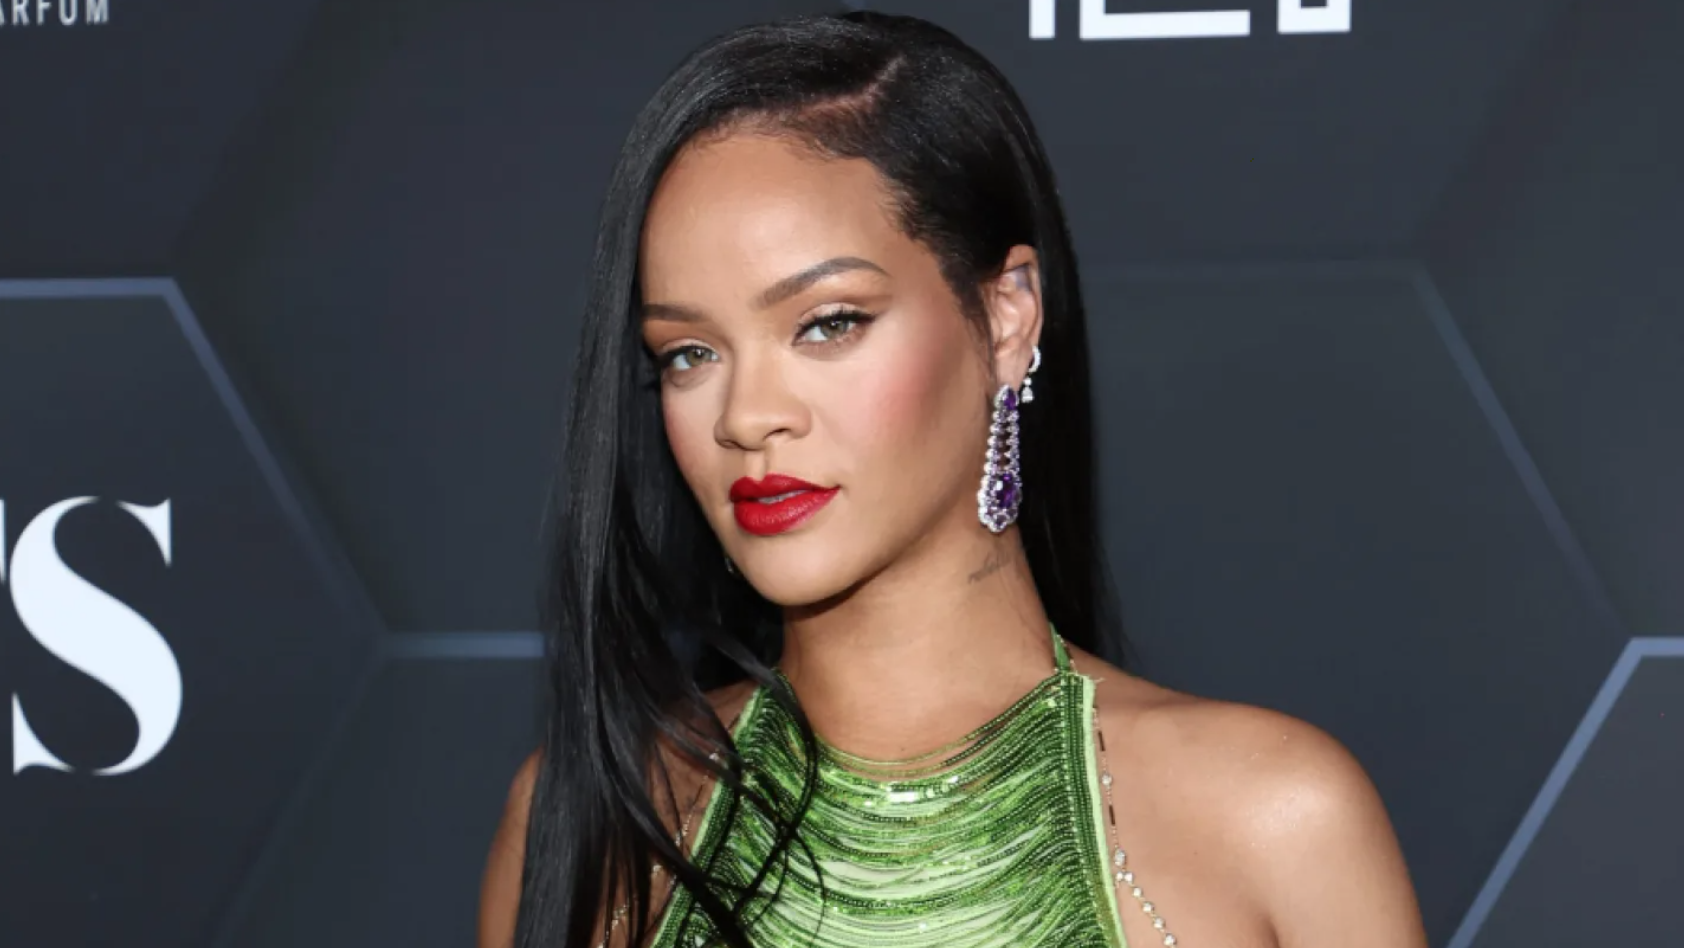 Rihanna Earns First Golden Globe Nomination With “Lift Me Up”